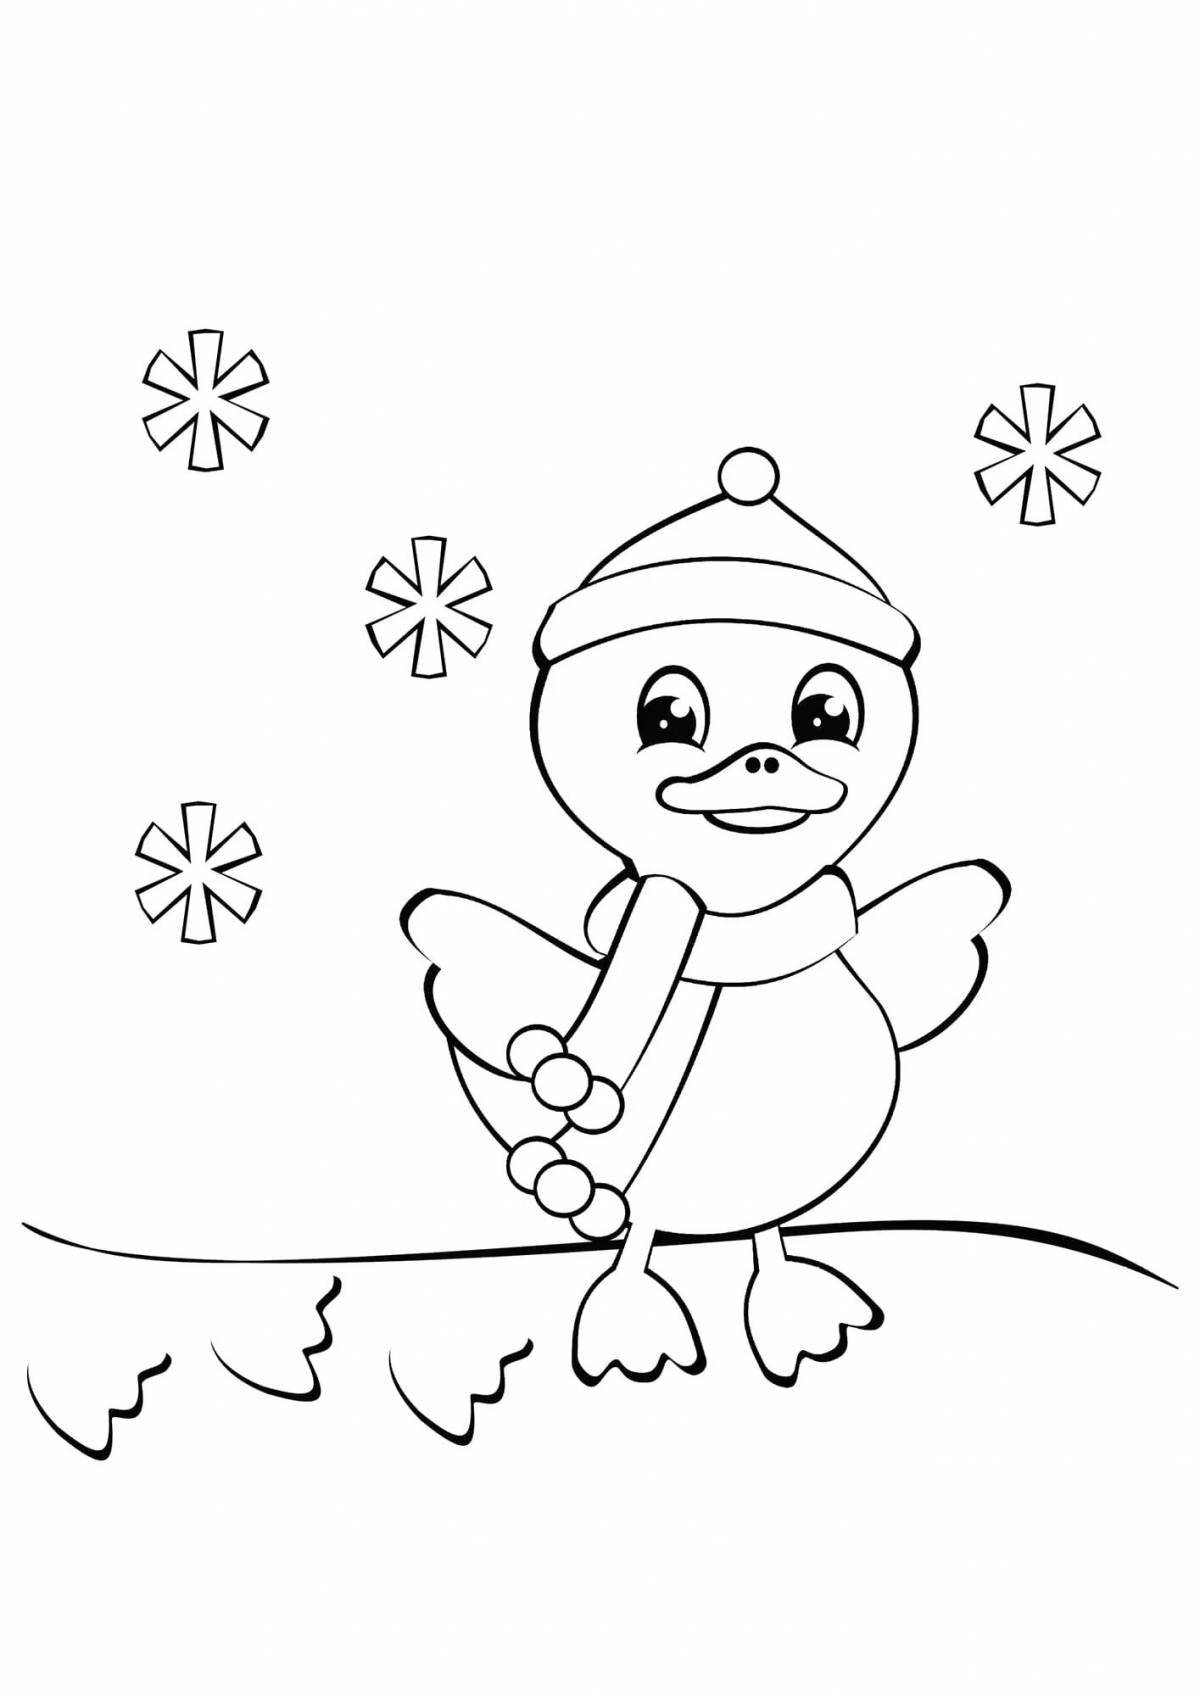 Shiny 5 year old winter coloring book